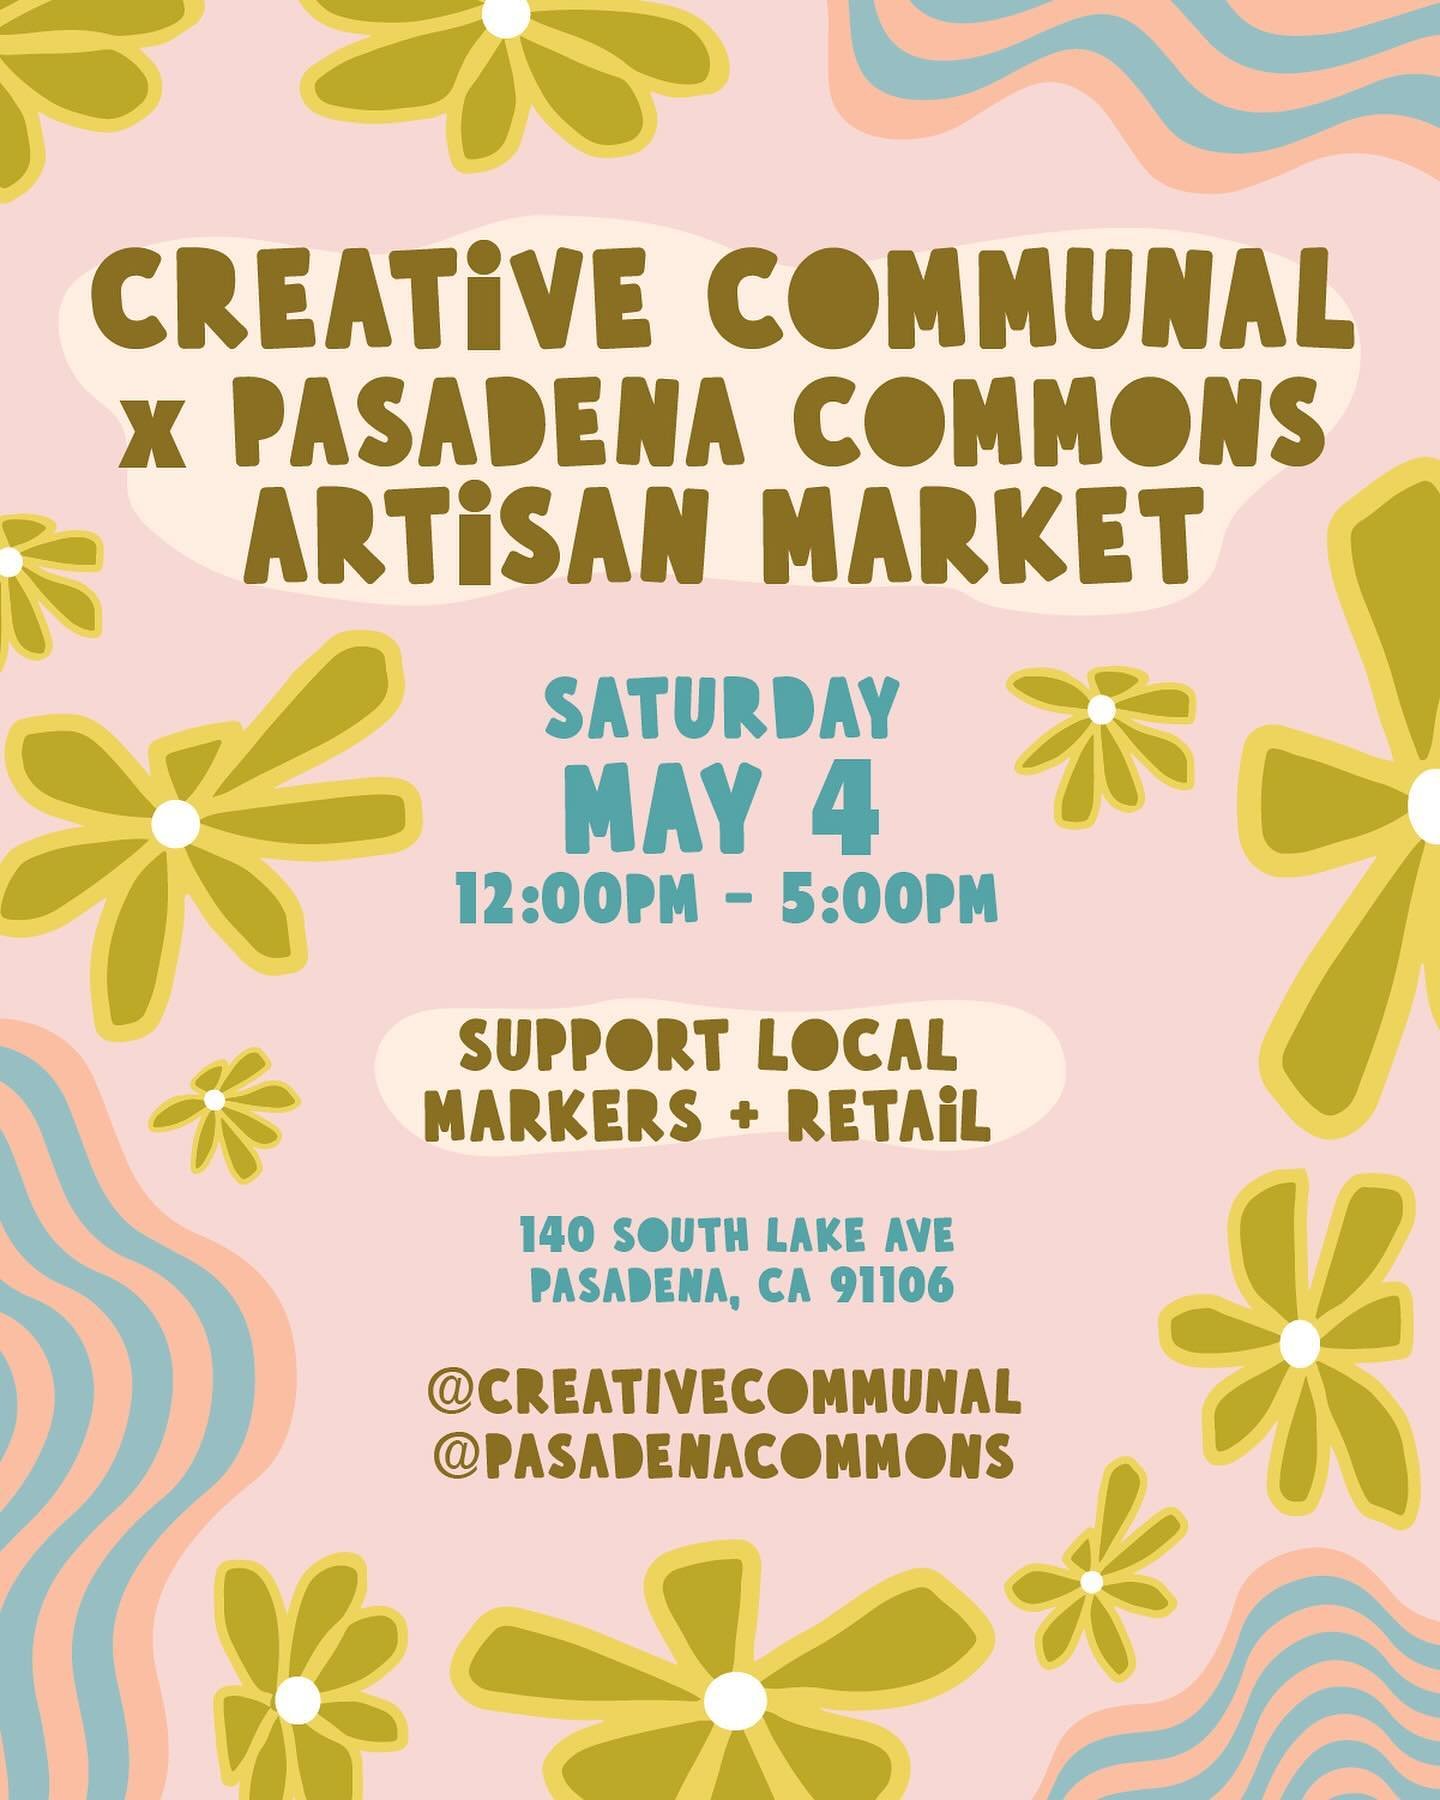 Pasadena! We've missed you - Join your favorite local makers this as we gear up for another fab market at @pasadenacommons this Saturday - May 4 from 12PM-5PM ☀️